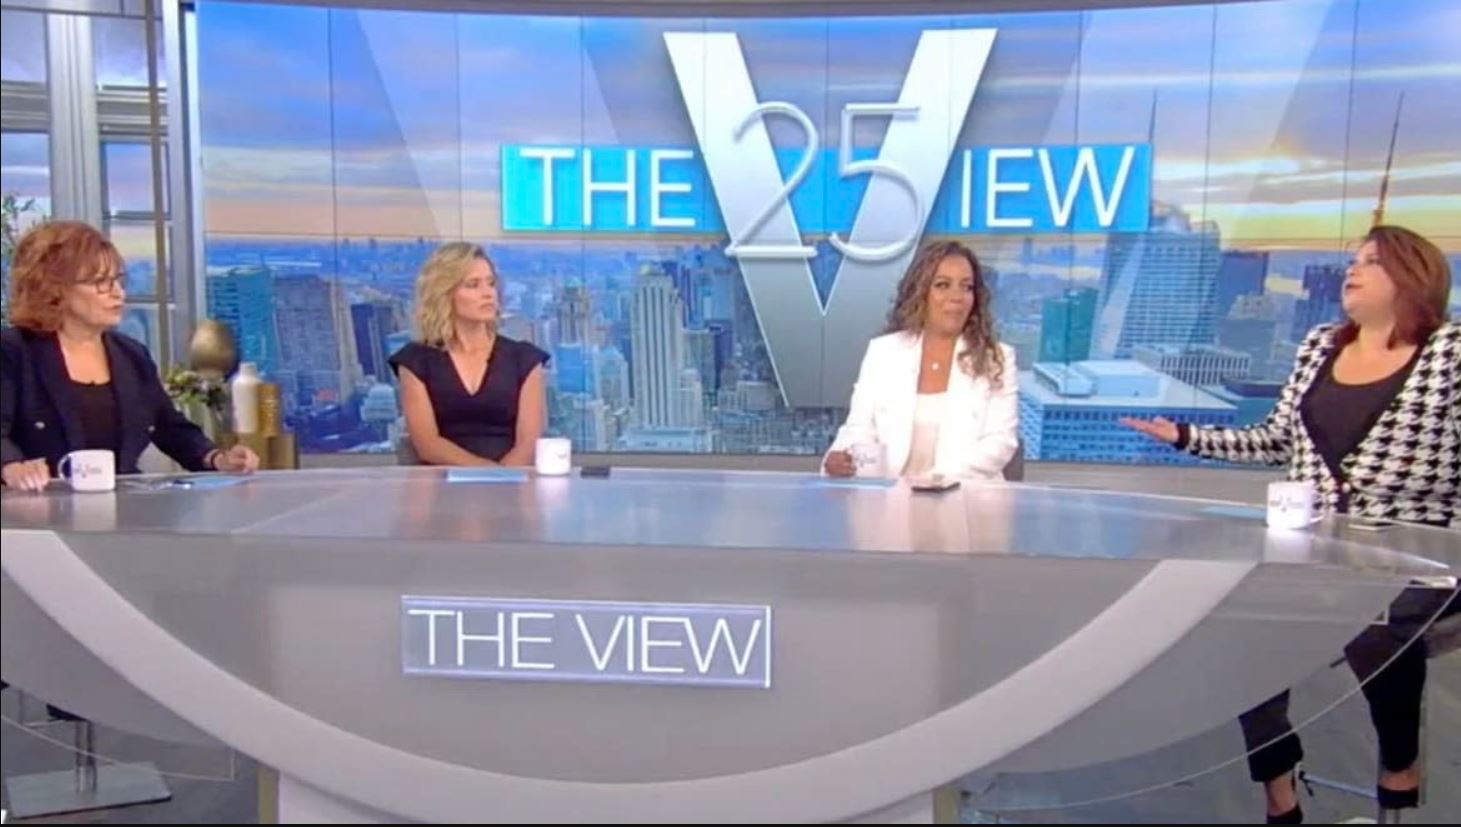 UPDATED: 2 'The View' Co-Hosts Test Positive for Covid During Show 3